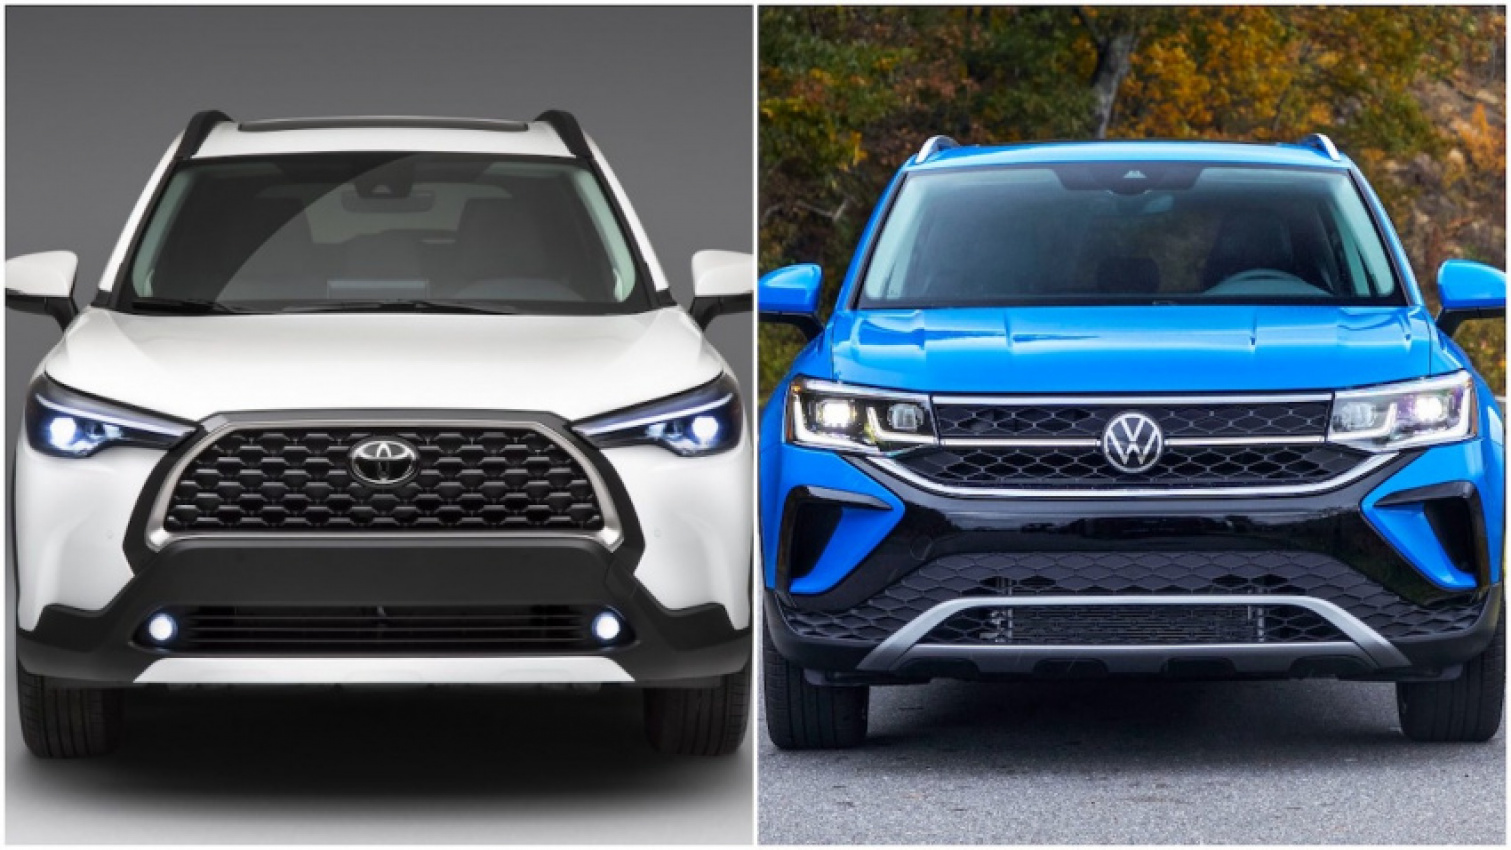 android, autos, cars, toyota, volkswagen, corolla cross, taos, toyota corolla cross, volkswagen taos, android, 2022 toyota corolla cross crushes the 2022 volkswagen taos in 1 crucial area